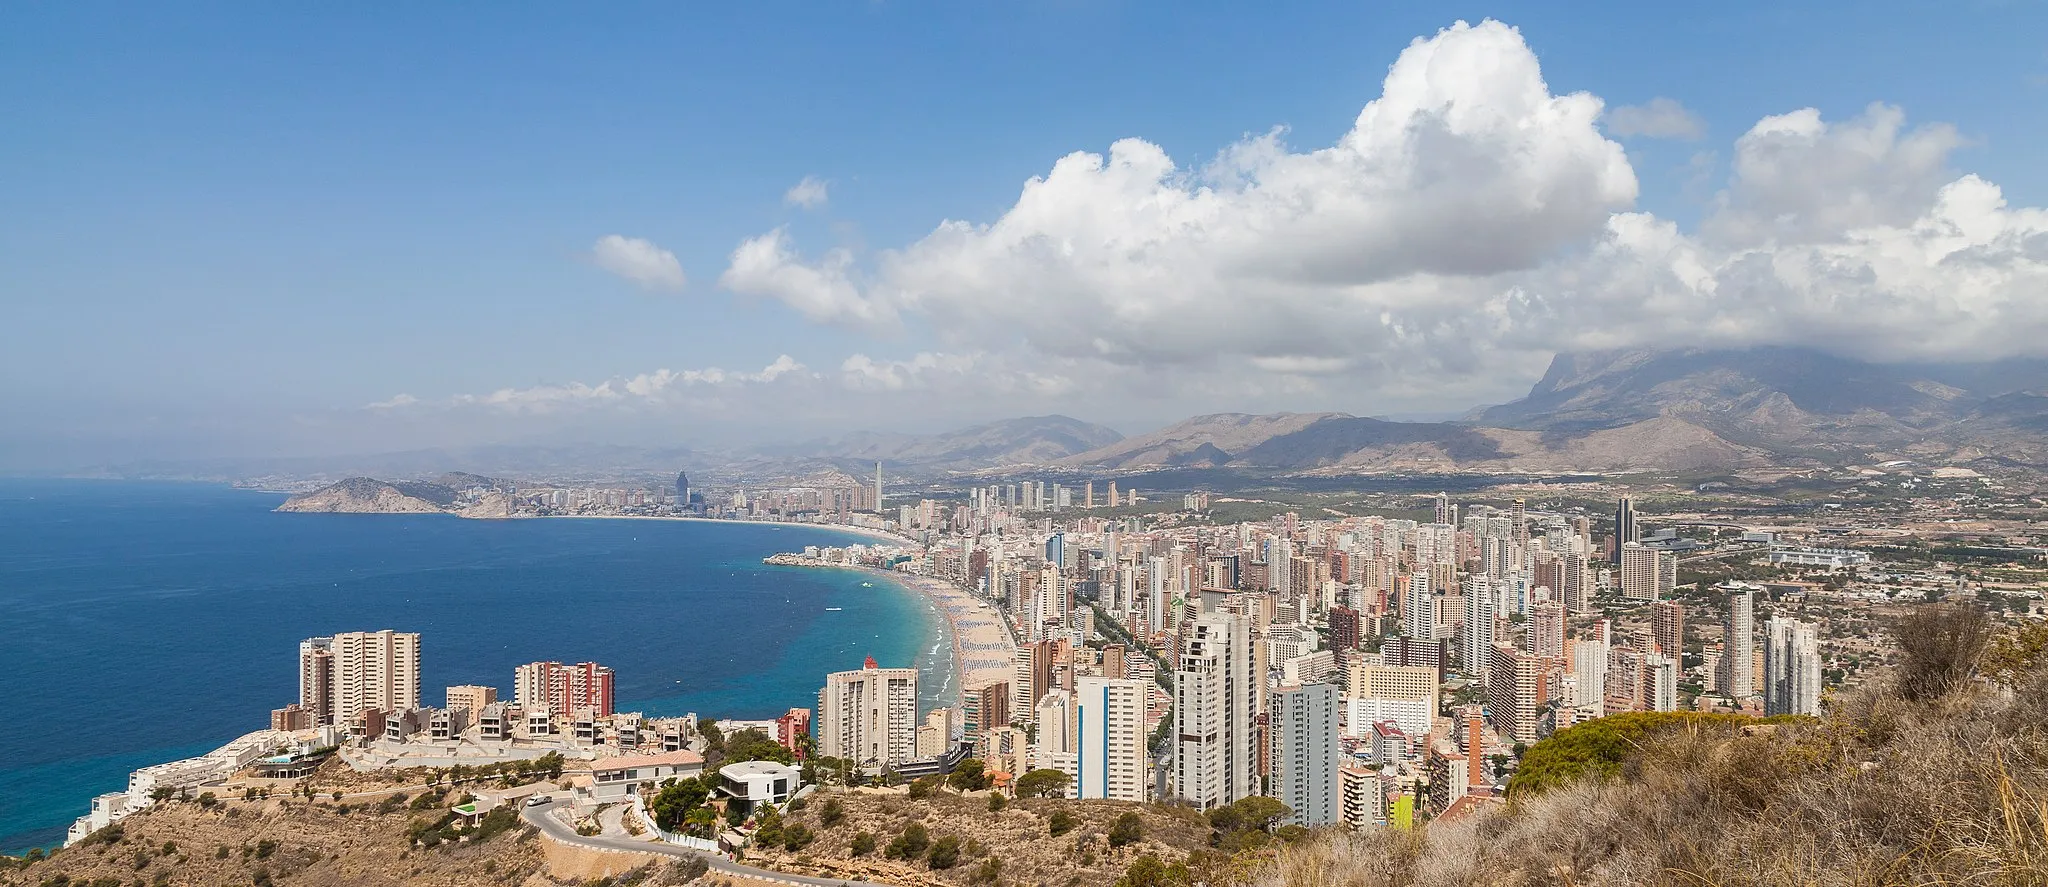 Photo showing: View of Benidorm, turistic capital of the Costa Blanca (literally White Coast) in Land of Valencia, Spain. The shot was taken from the Cross of Benidorm, located on the summit of the Sierra Helada. Benidorm, is a town with 73,000 inhabitants throughout the year but with a peak of over half a million in the summer season. It's the third town with the most concentration of tall buildings in Europe, after London and Milan, whereas in Spain, Benidorm is positioned third, behind Barcelona and Madrid in the total number of skyscrapers. Nevertheless, Benidorm has the most high-rise buildings per capita in the world.